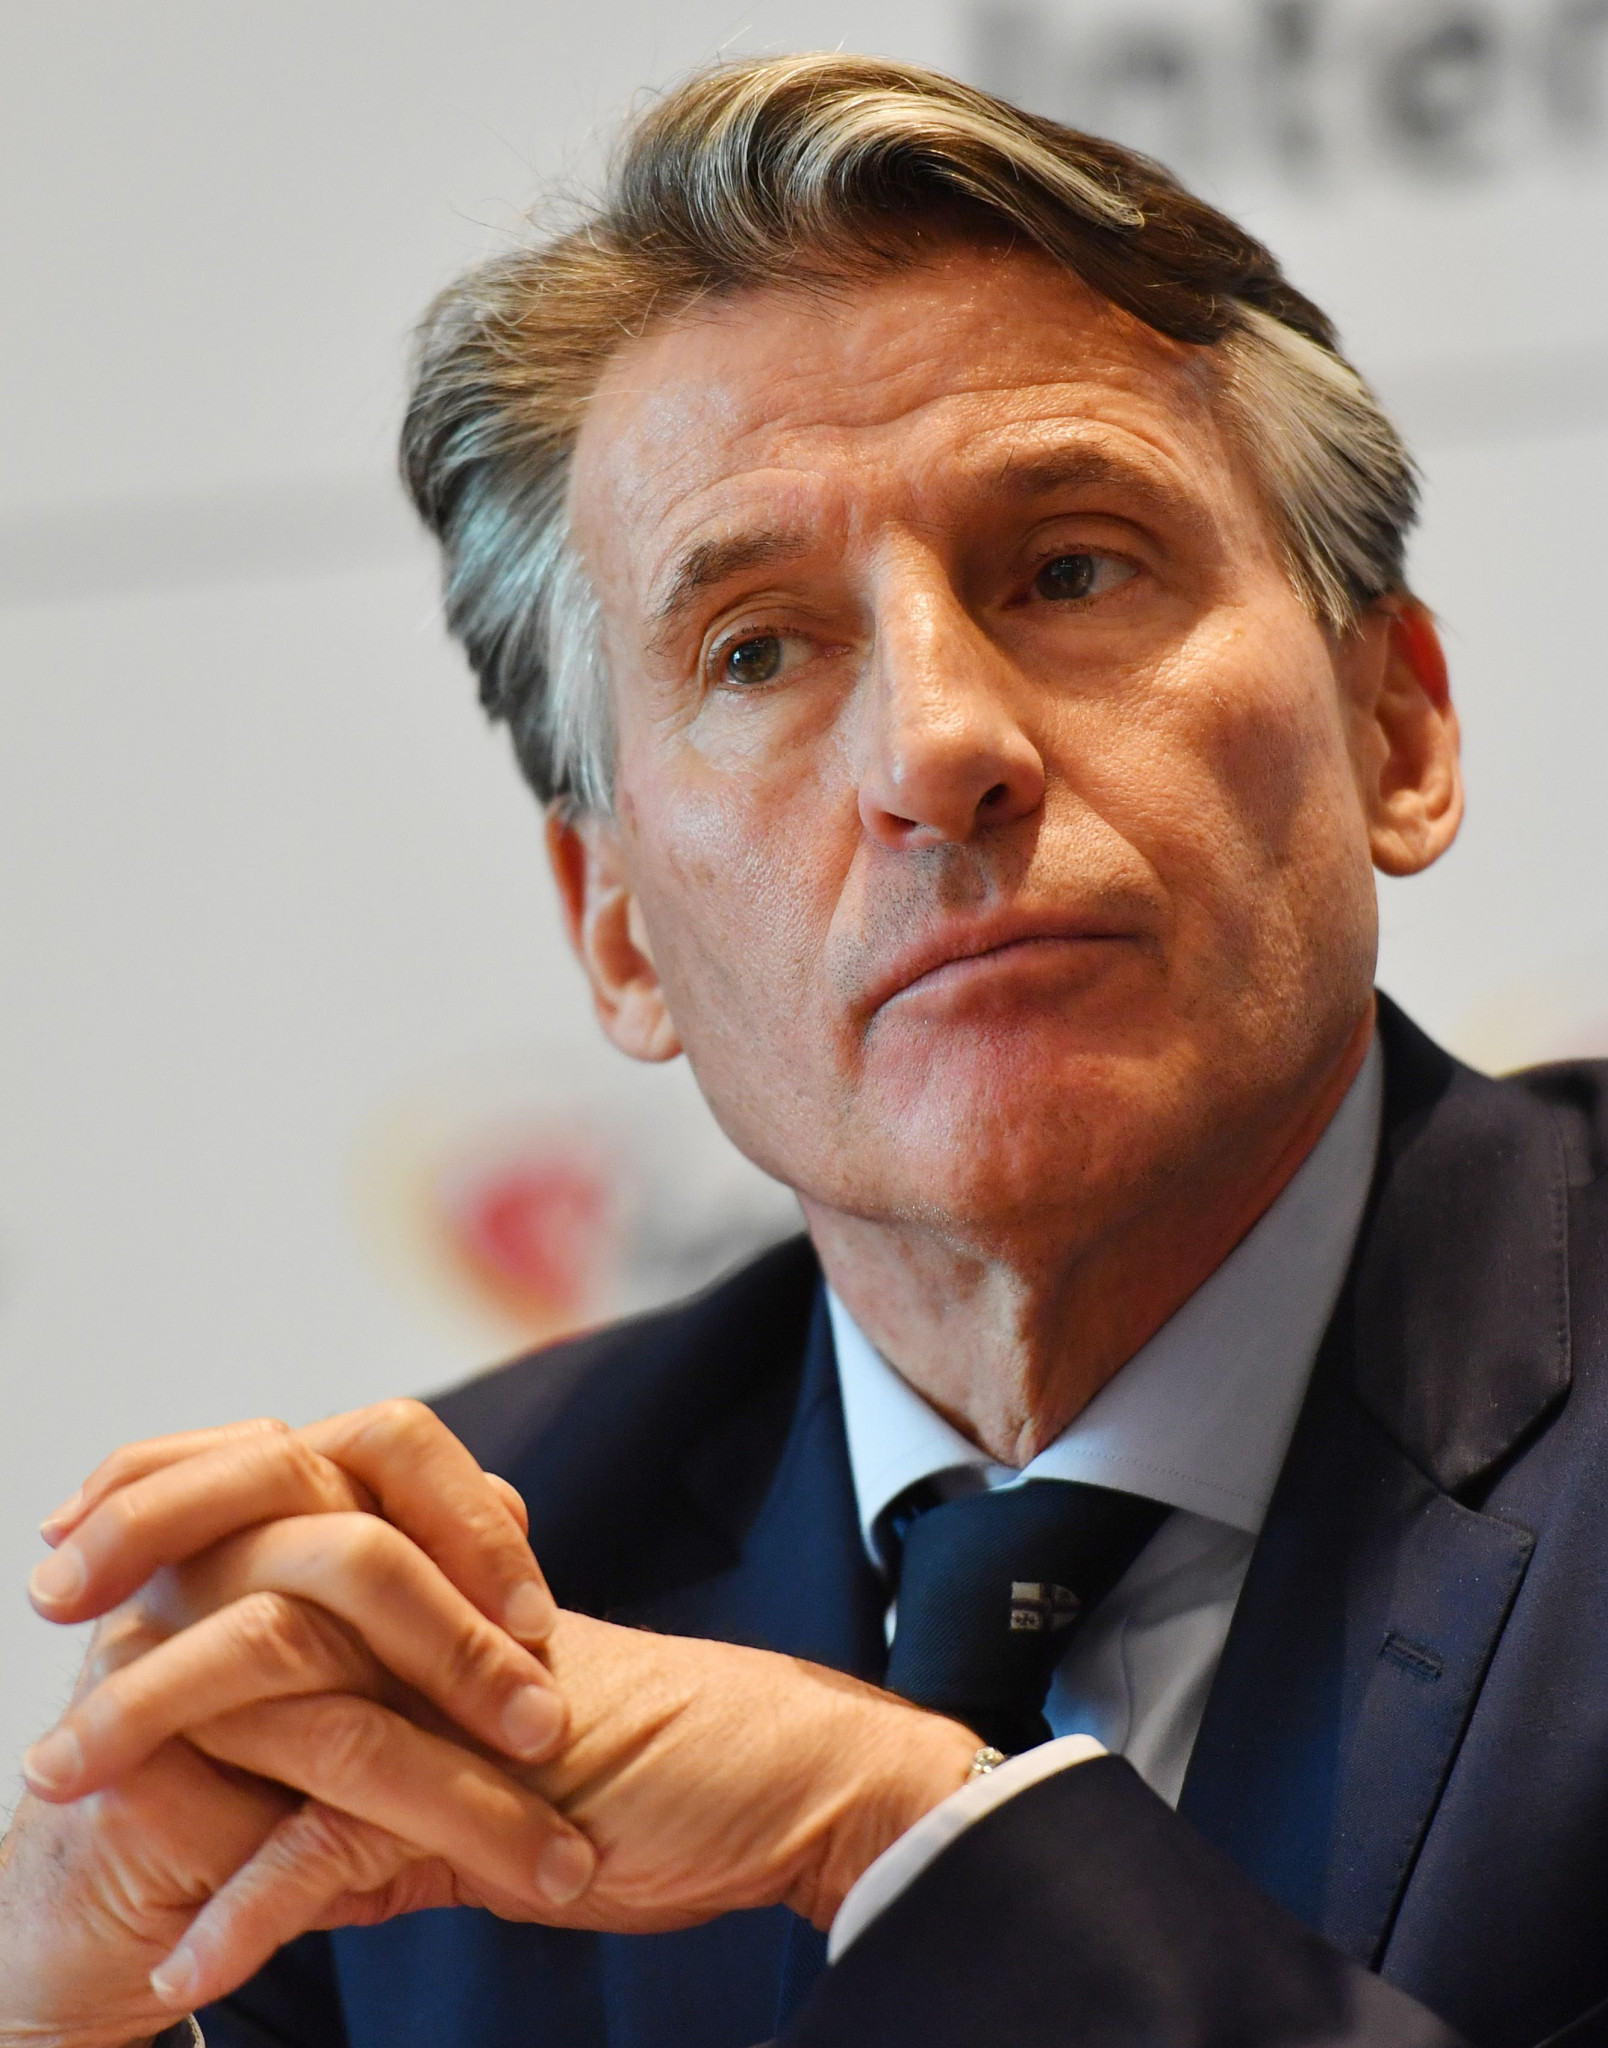  Coe to meet disgraced former IAAF President Diack to help French police investigation